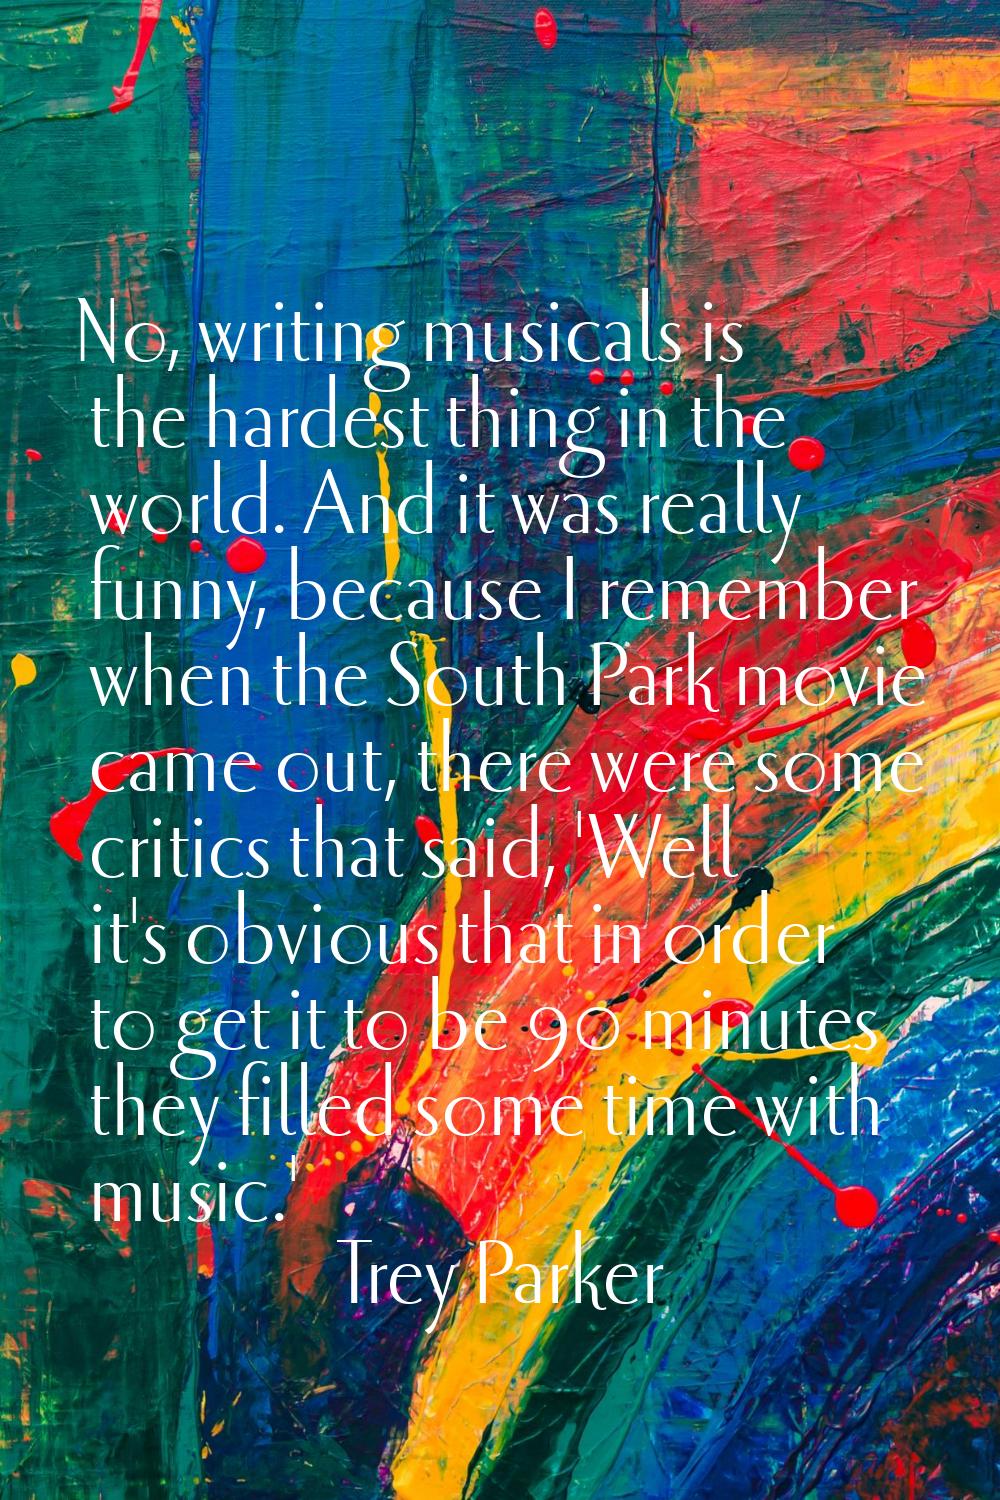 No, writing musicals is the hardest thing in the world. And it was really funny, because I remember